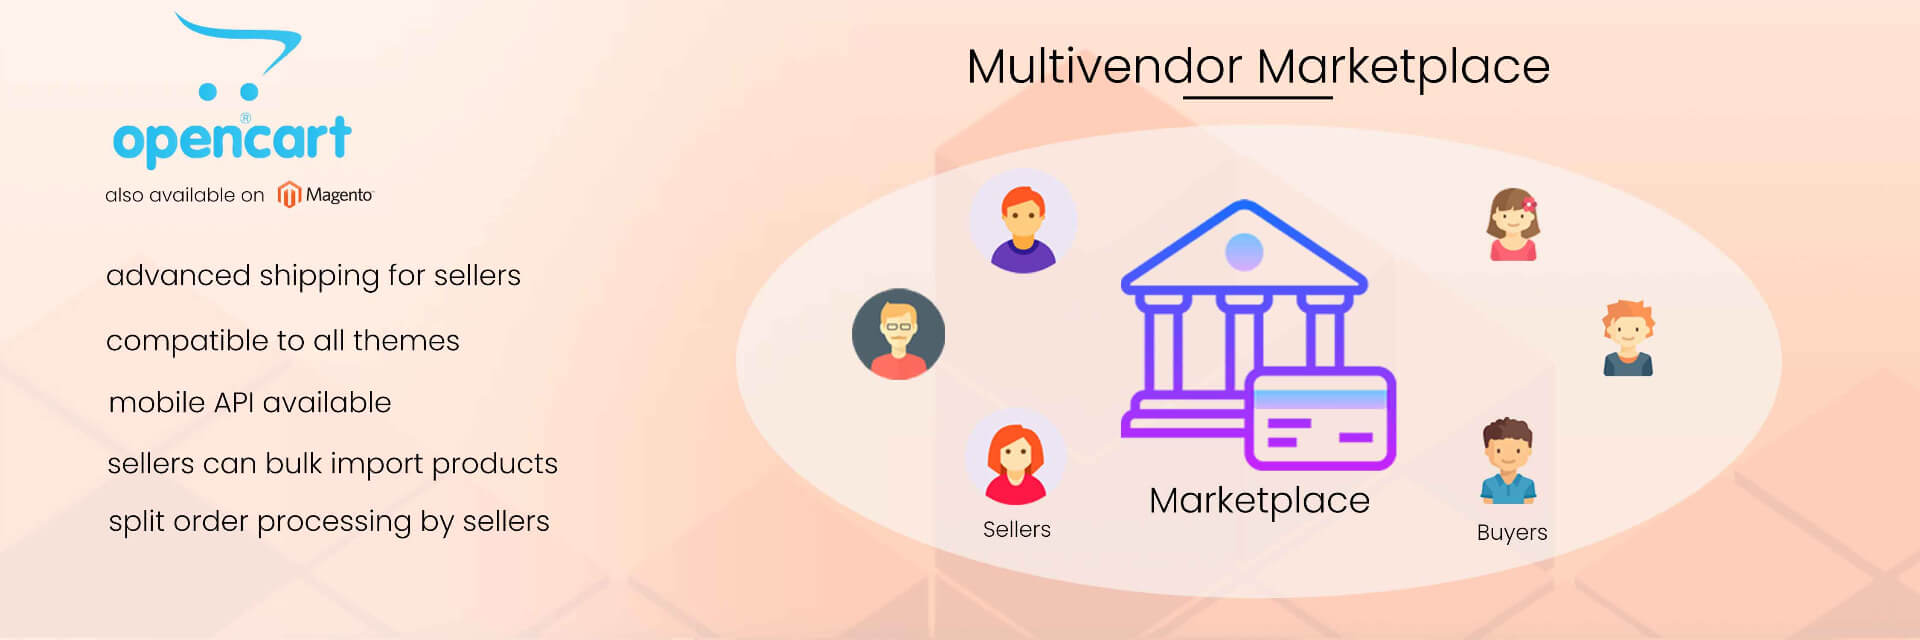 multivendor marketplace for magento and opencart